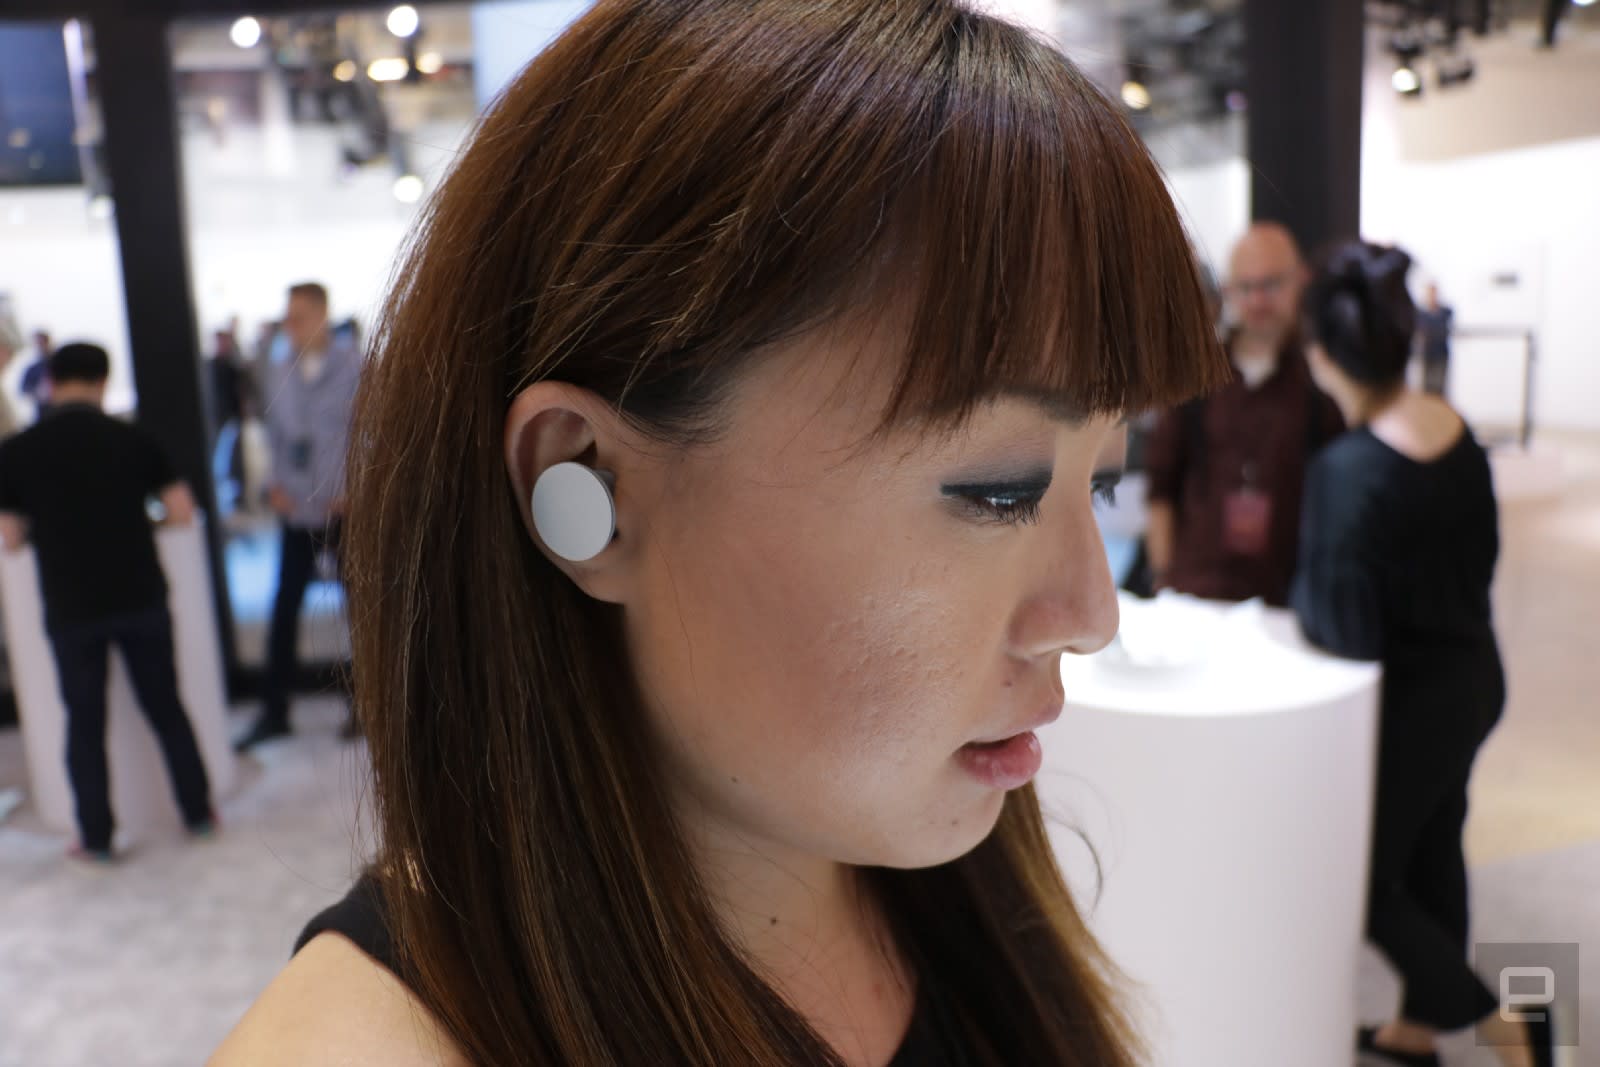 Surface Earbuds hands-on